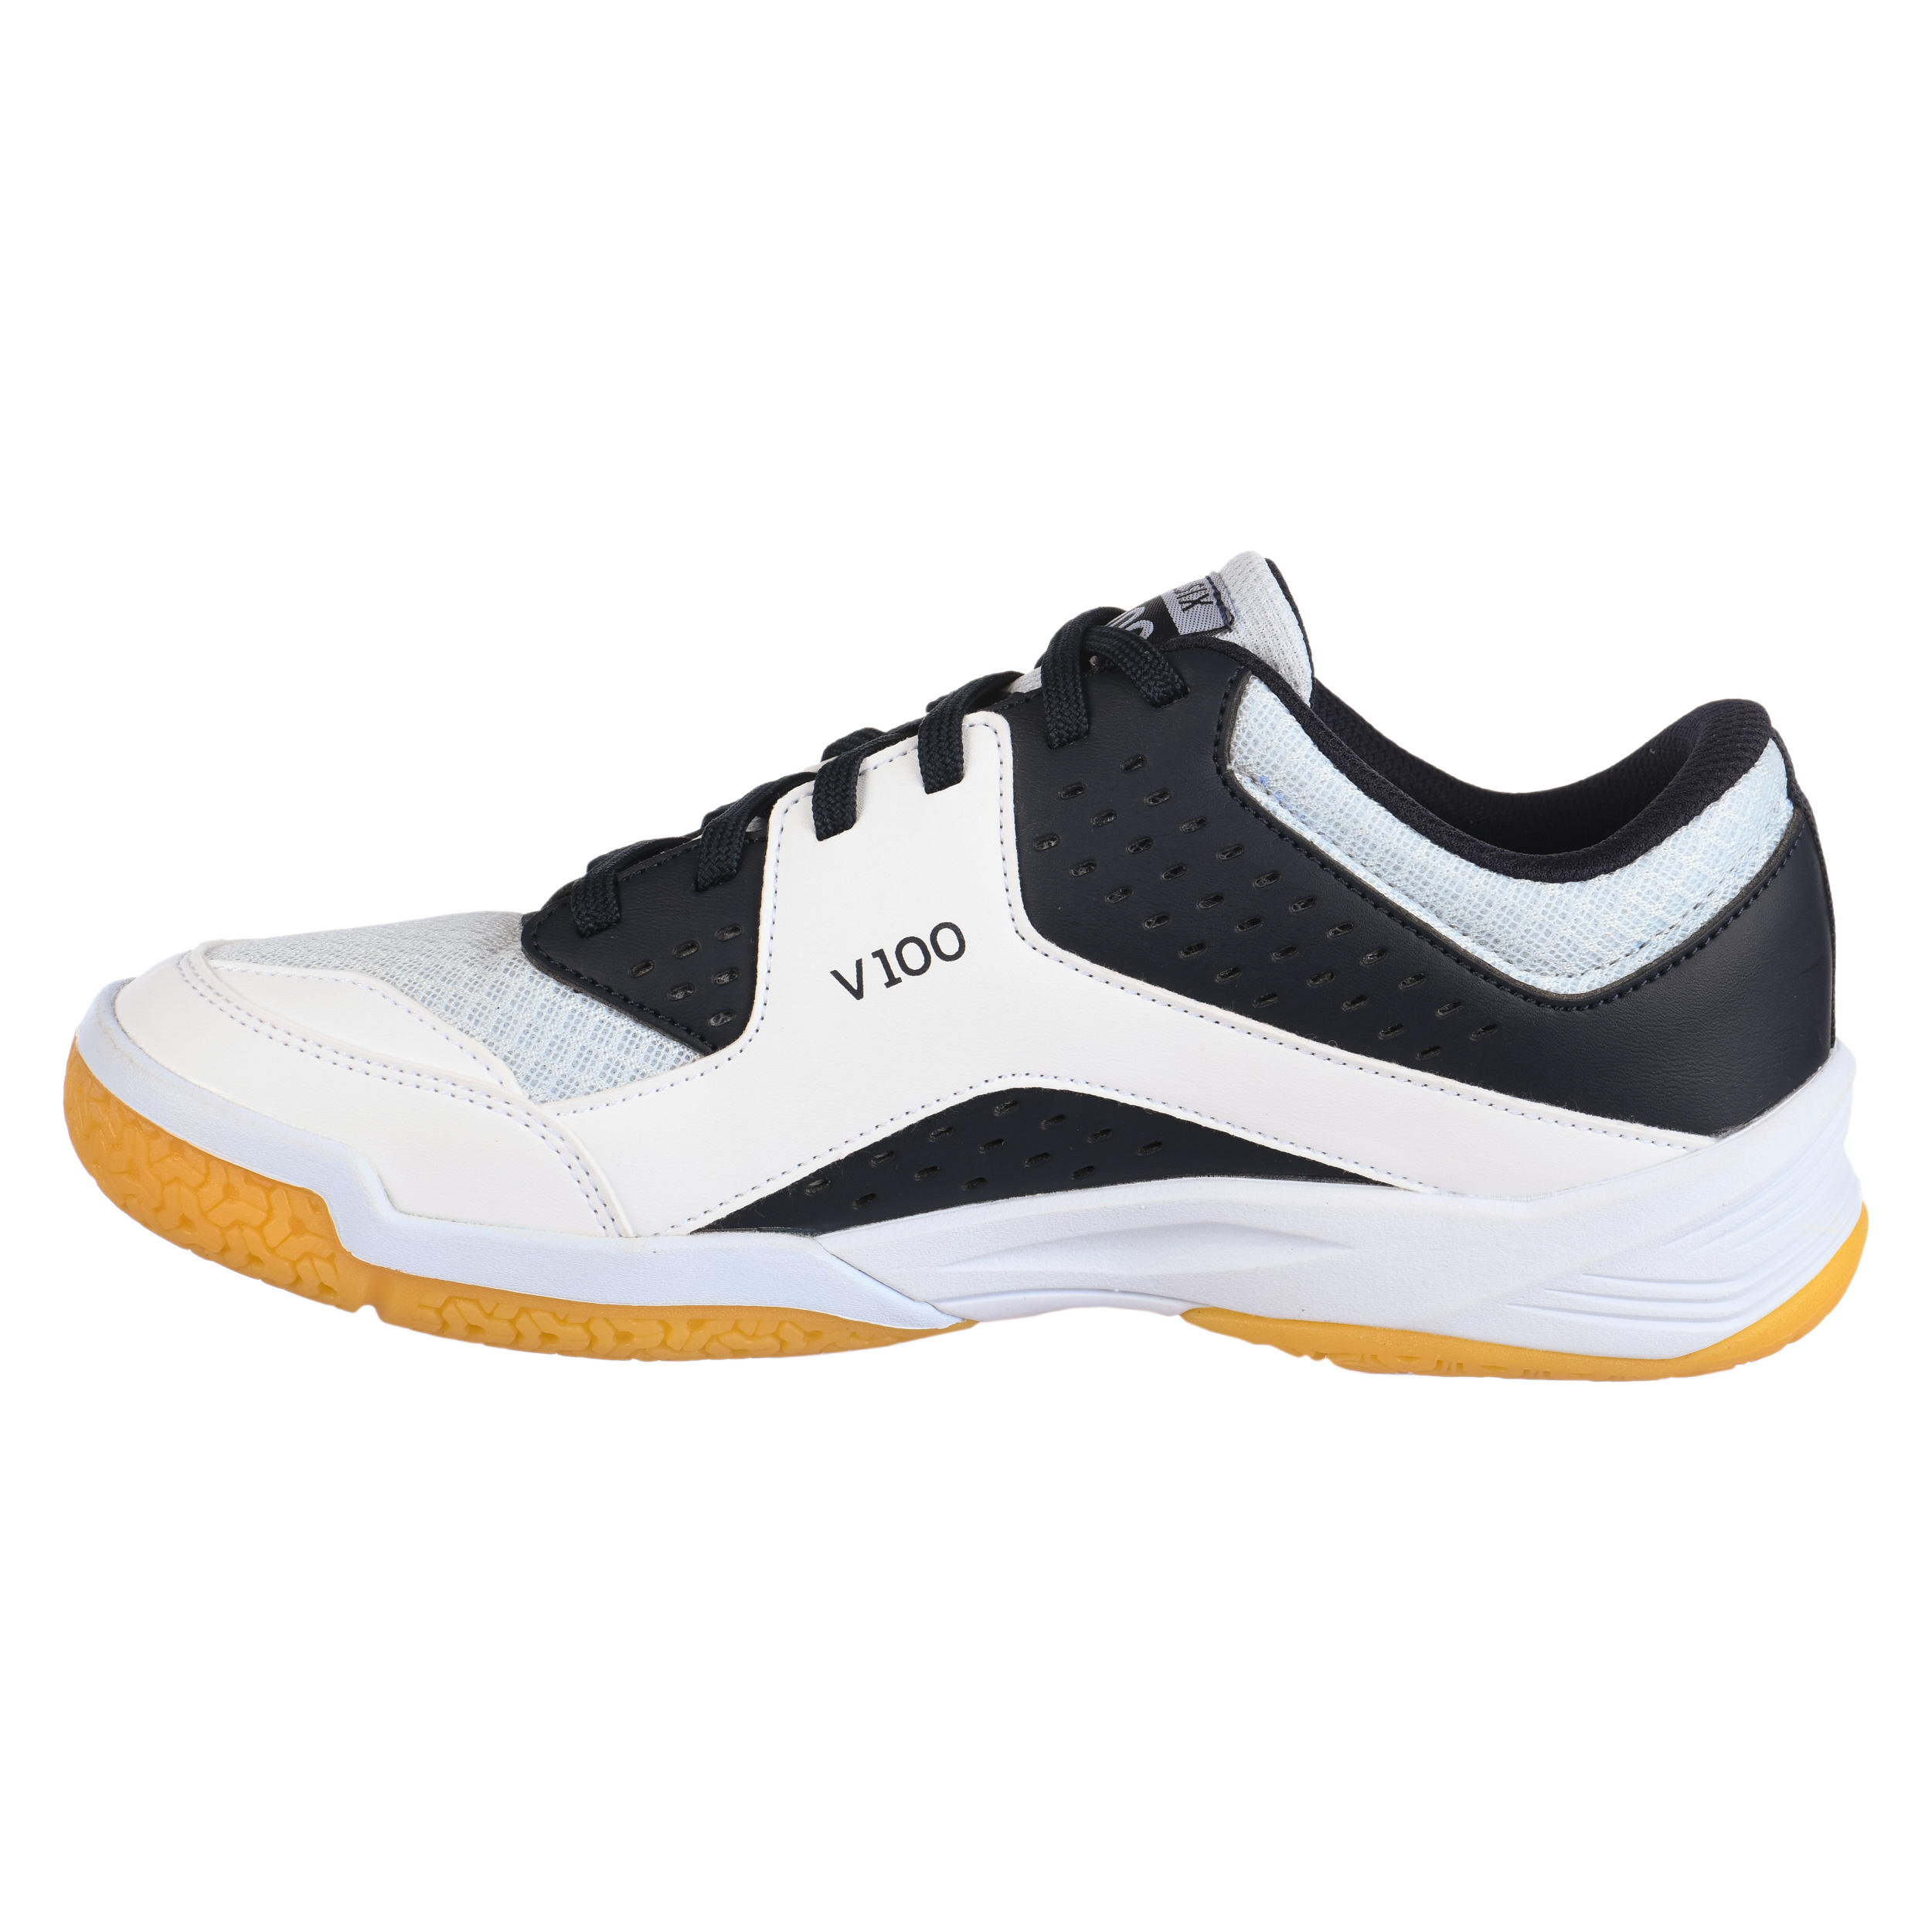 Volleyball Shoes V100 - White/Blue/Grey